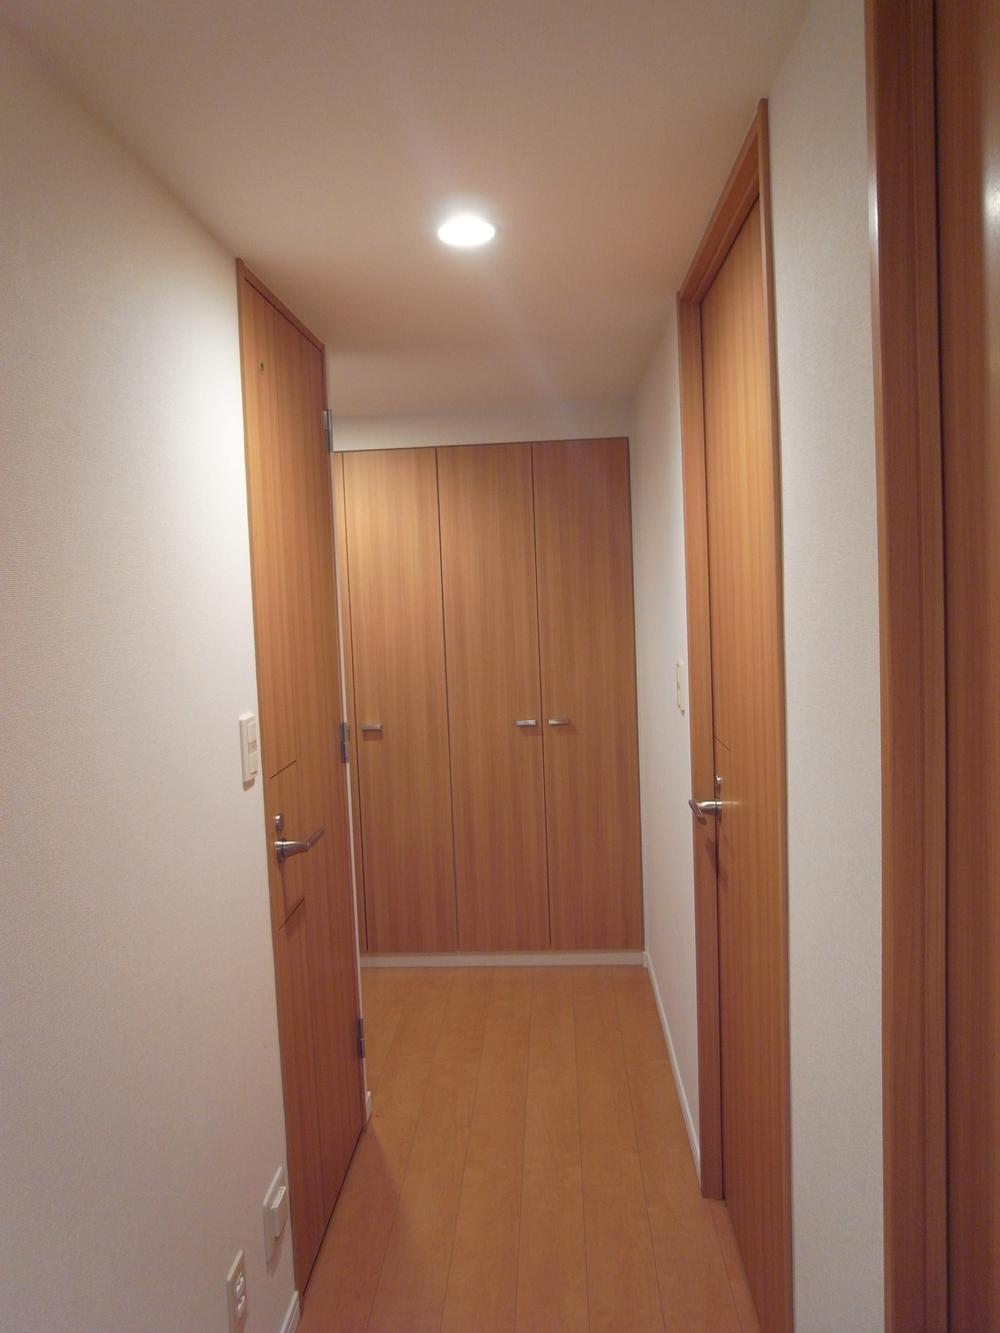 Other introspection. Hallway with storage compartment